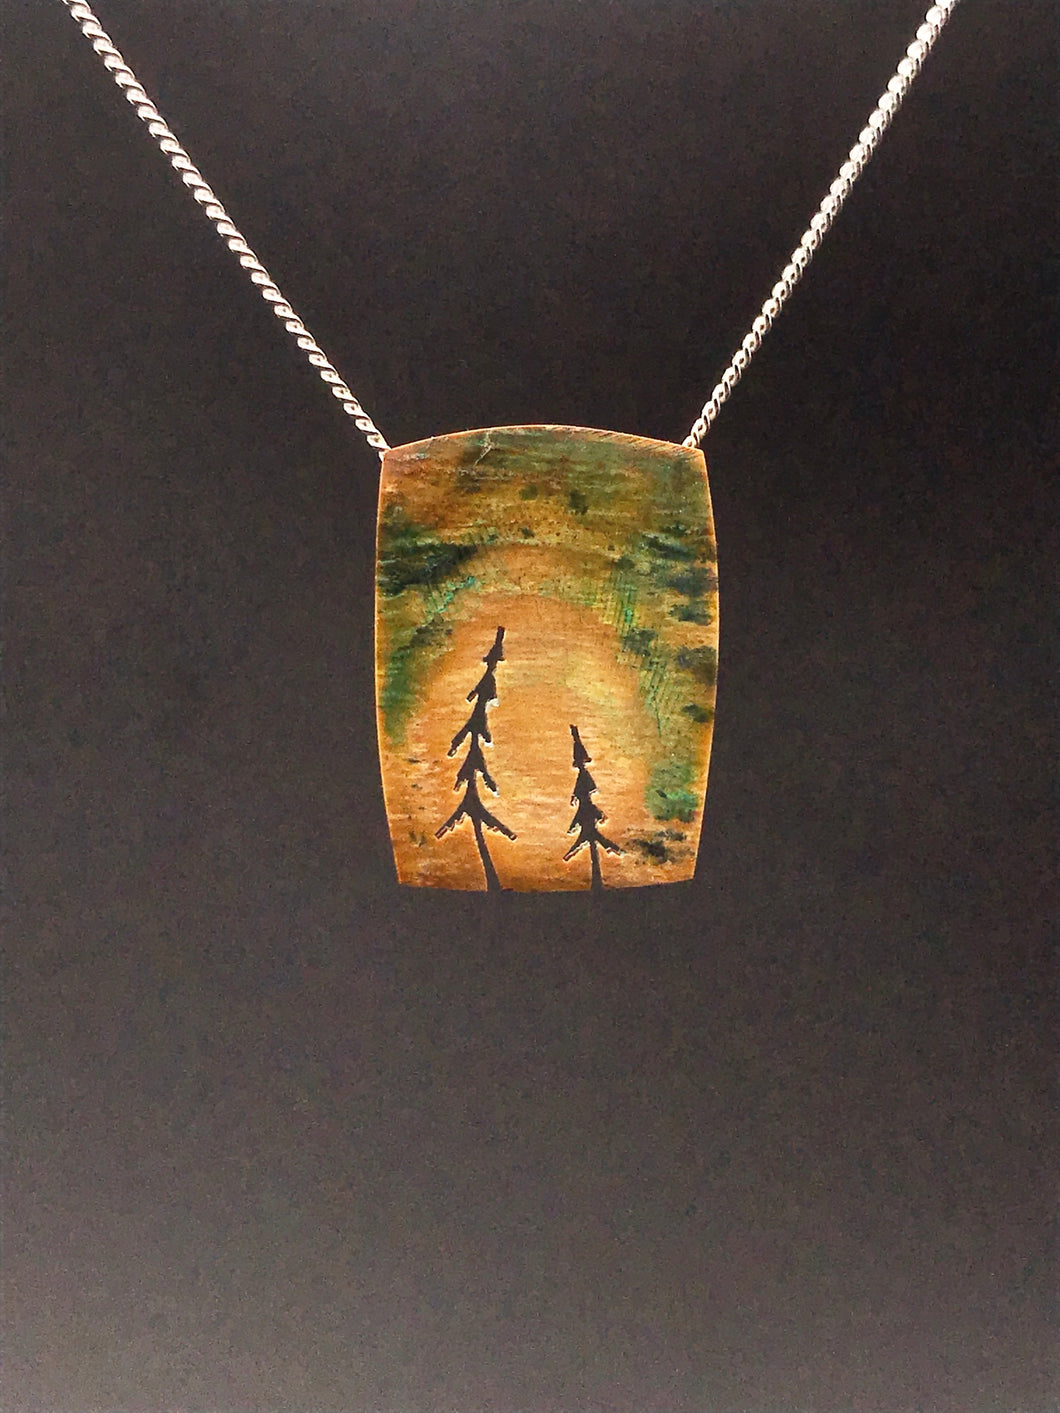 Small Tree of Life Pendant – Southern Highland Craft Guild